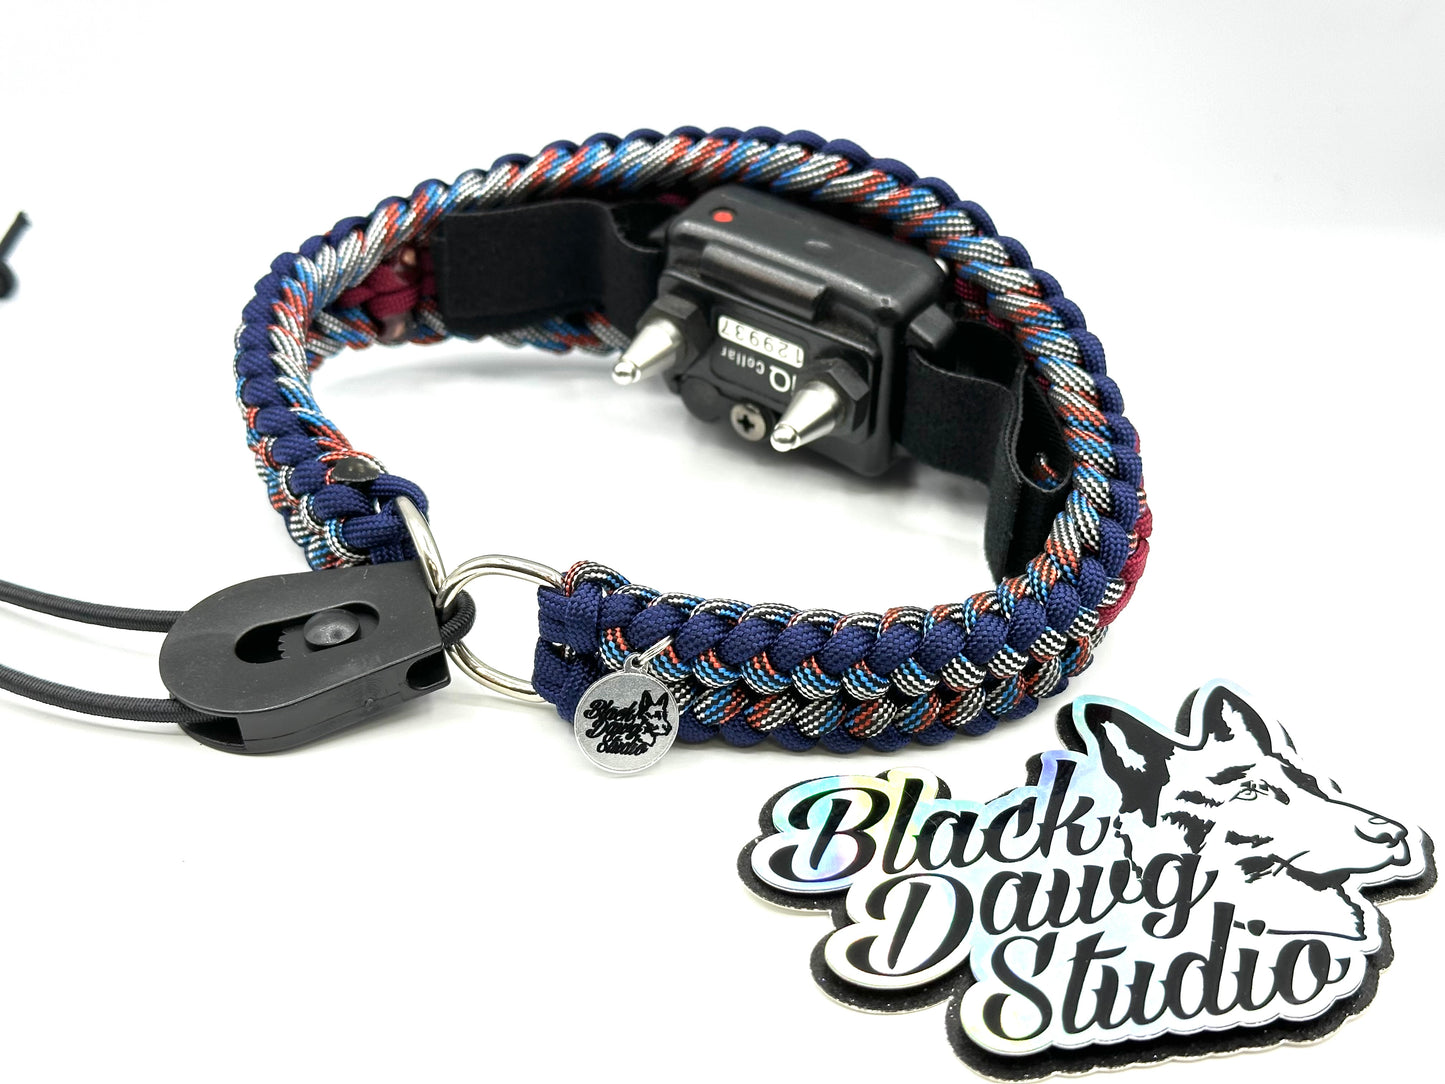 e-Secret Keeper Paracord Collar - Electric/Remote Training Collar Cover - Midnight, Captain America, Burgundy, Captain America, and Silver